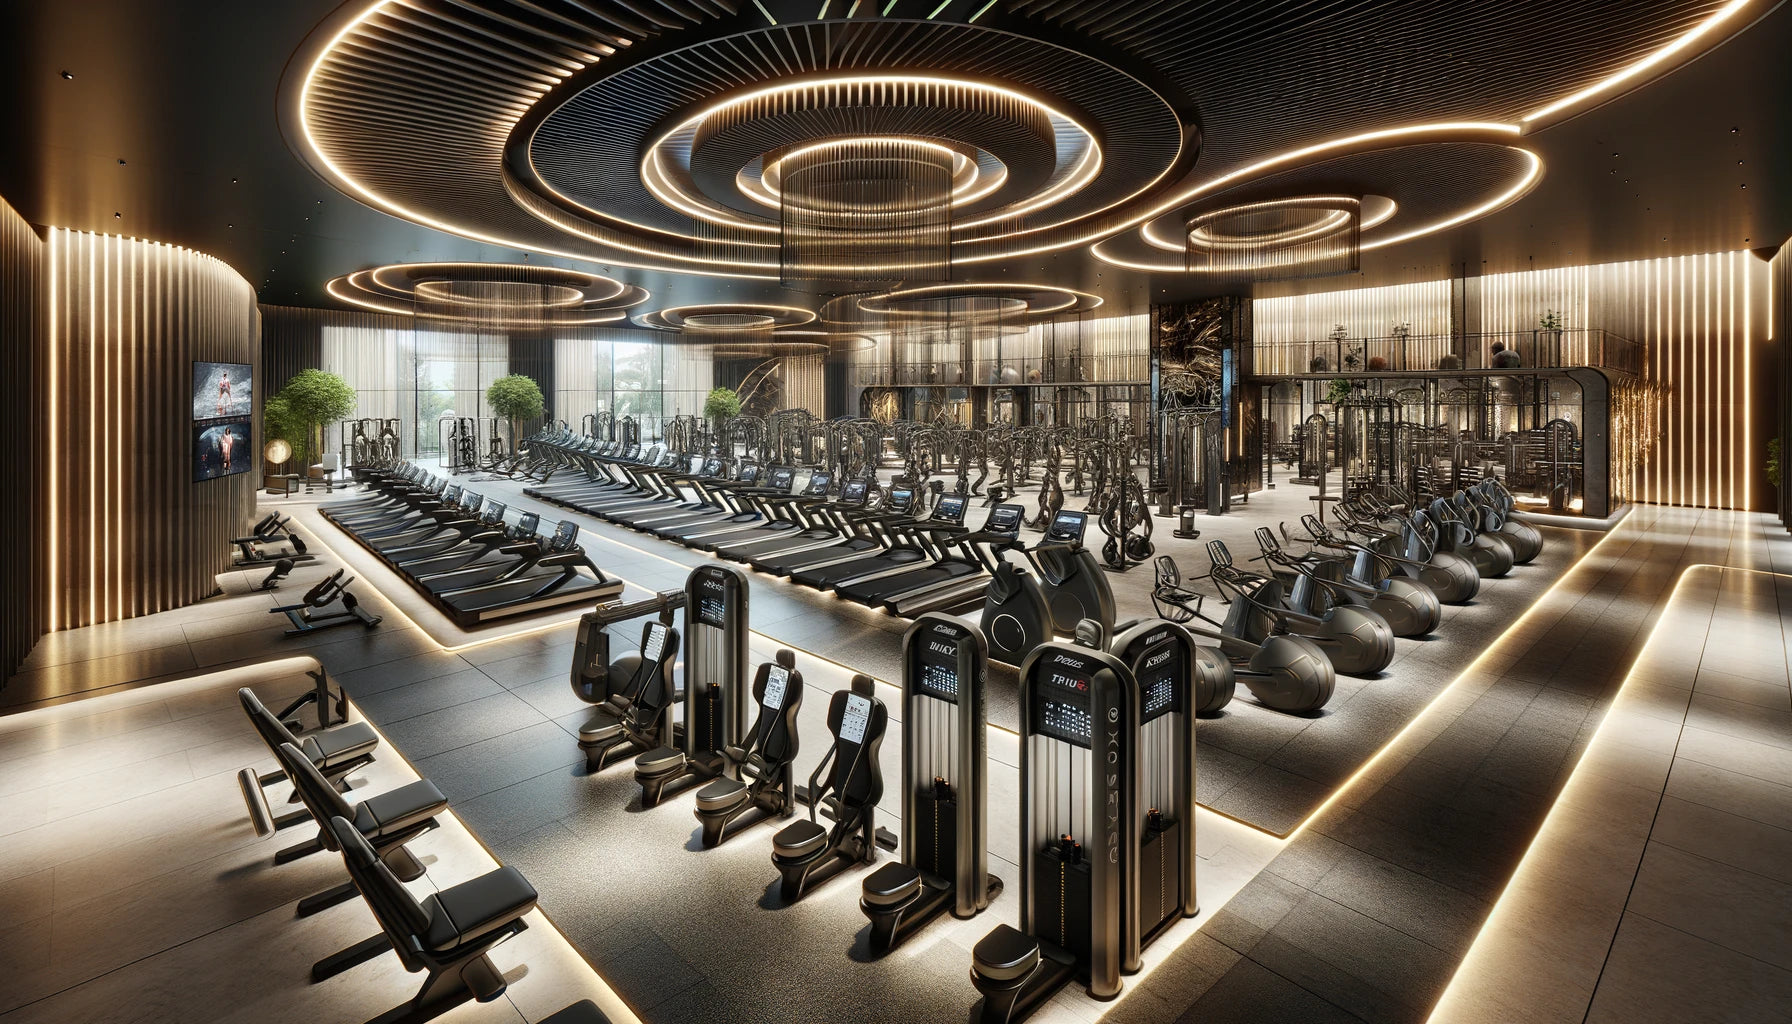 The Best 5 Commercial Gym Equipment Brands in the Saudi Arabia